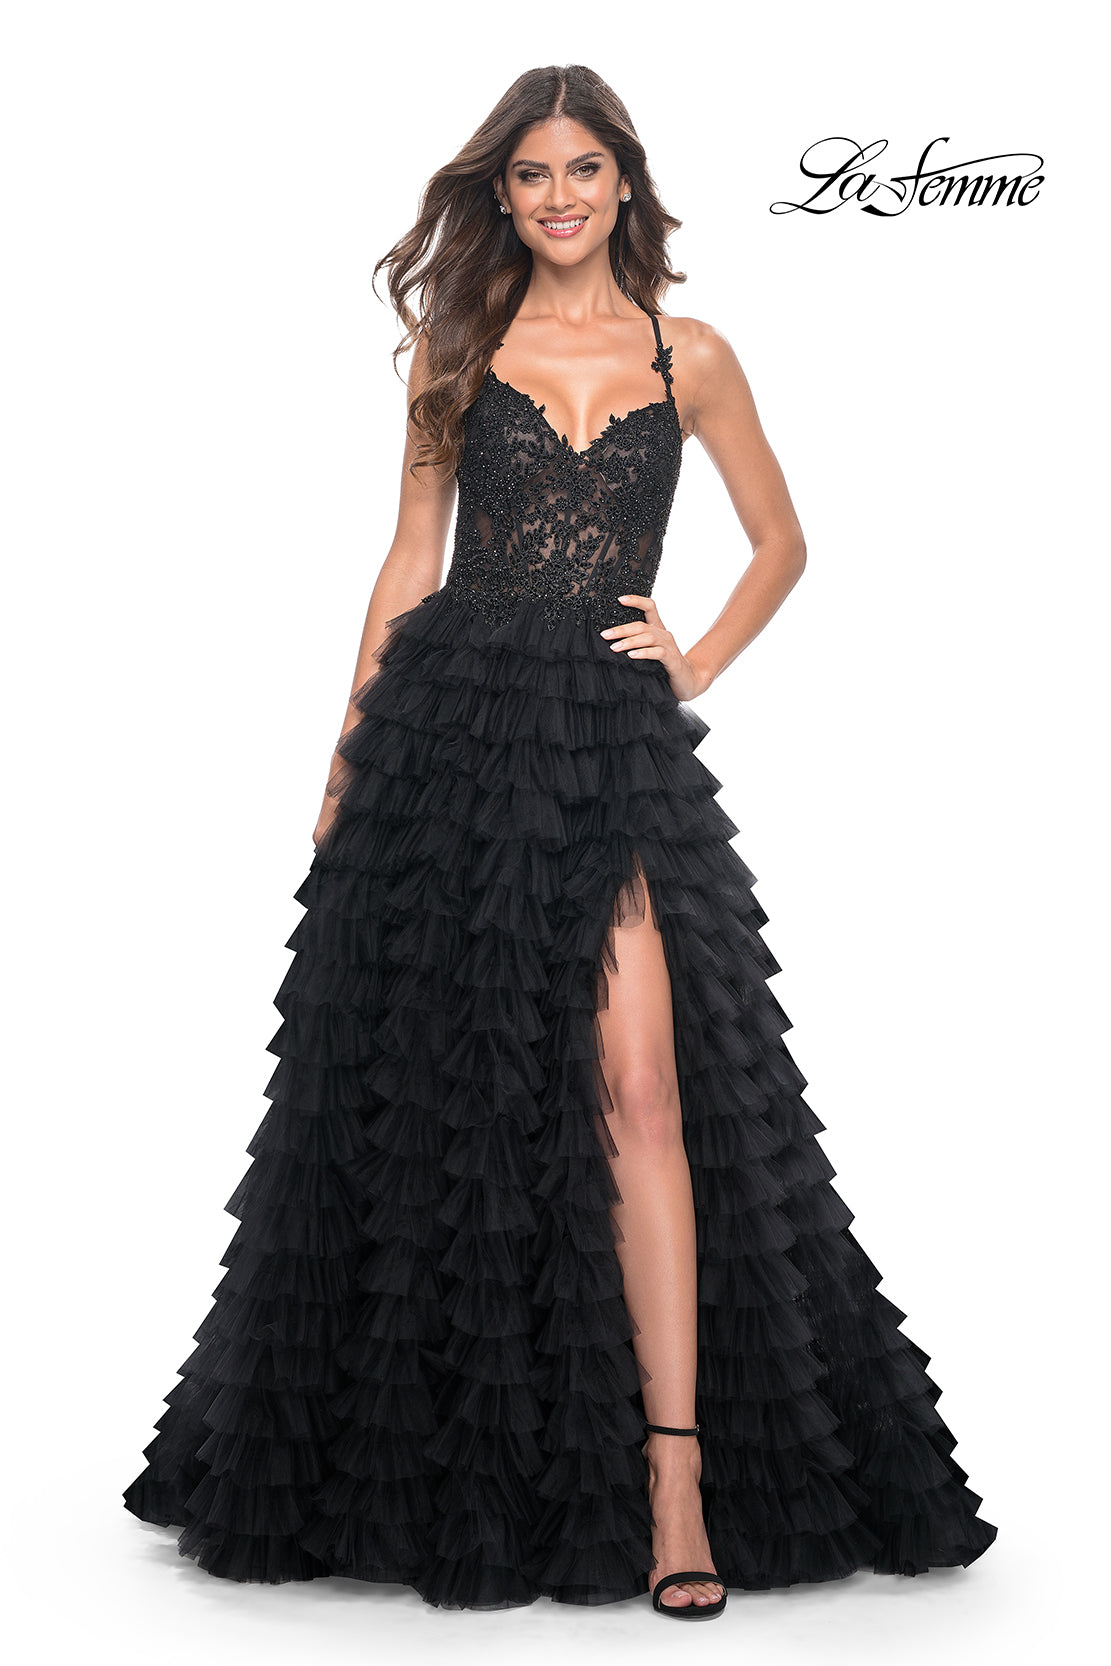 La-Femme-32128-Sweetheart-Neckline-Lace-up-Back-High-Slit-Lace-Tulle-Ball-Gowns-Black-Evening-Dress-B-Chic-Fashions-Prom-Dress